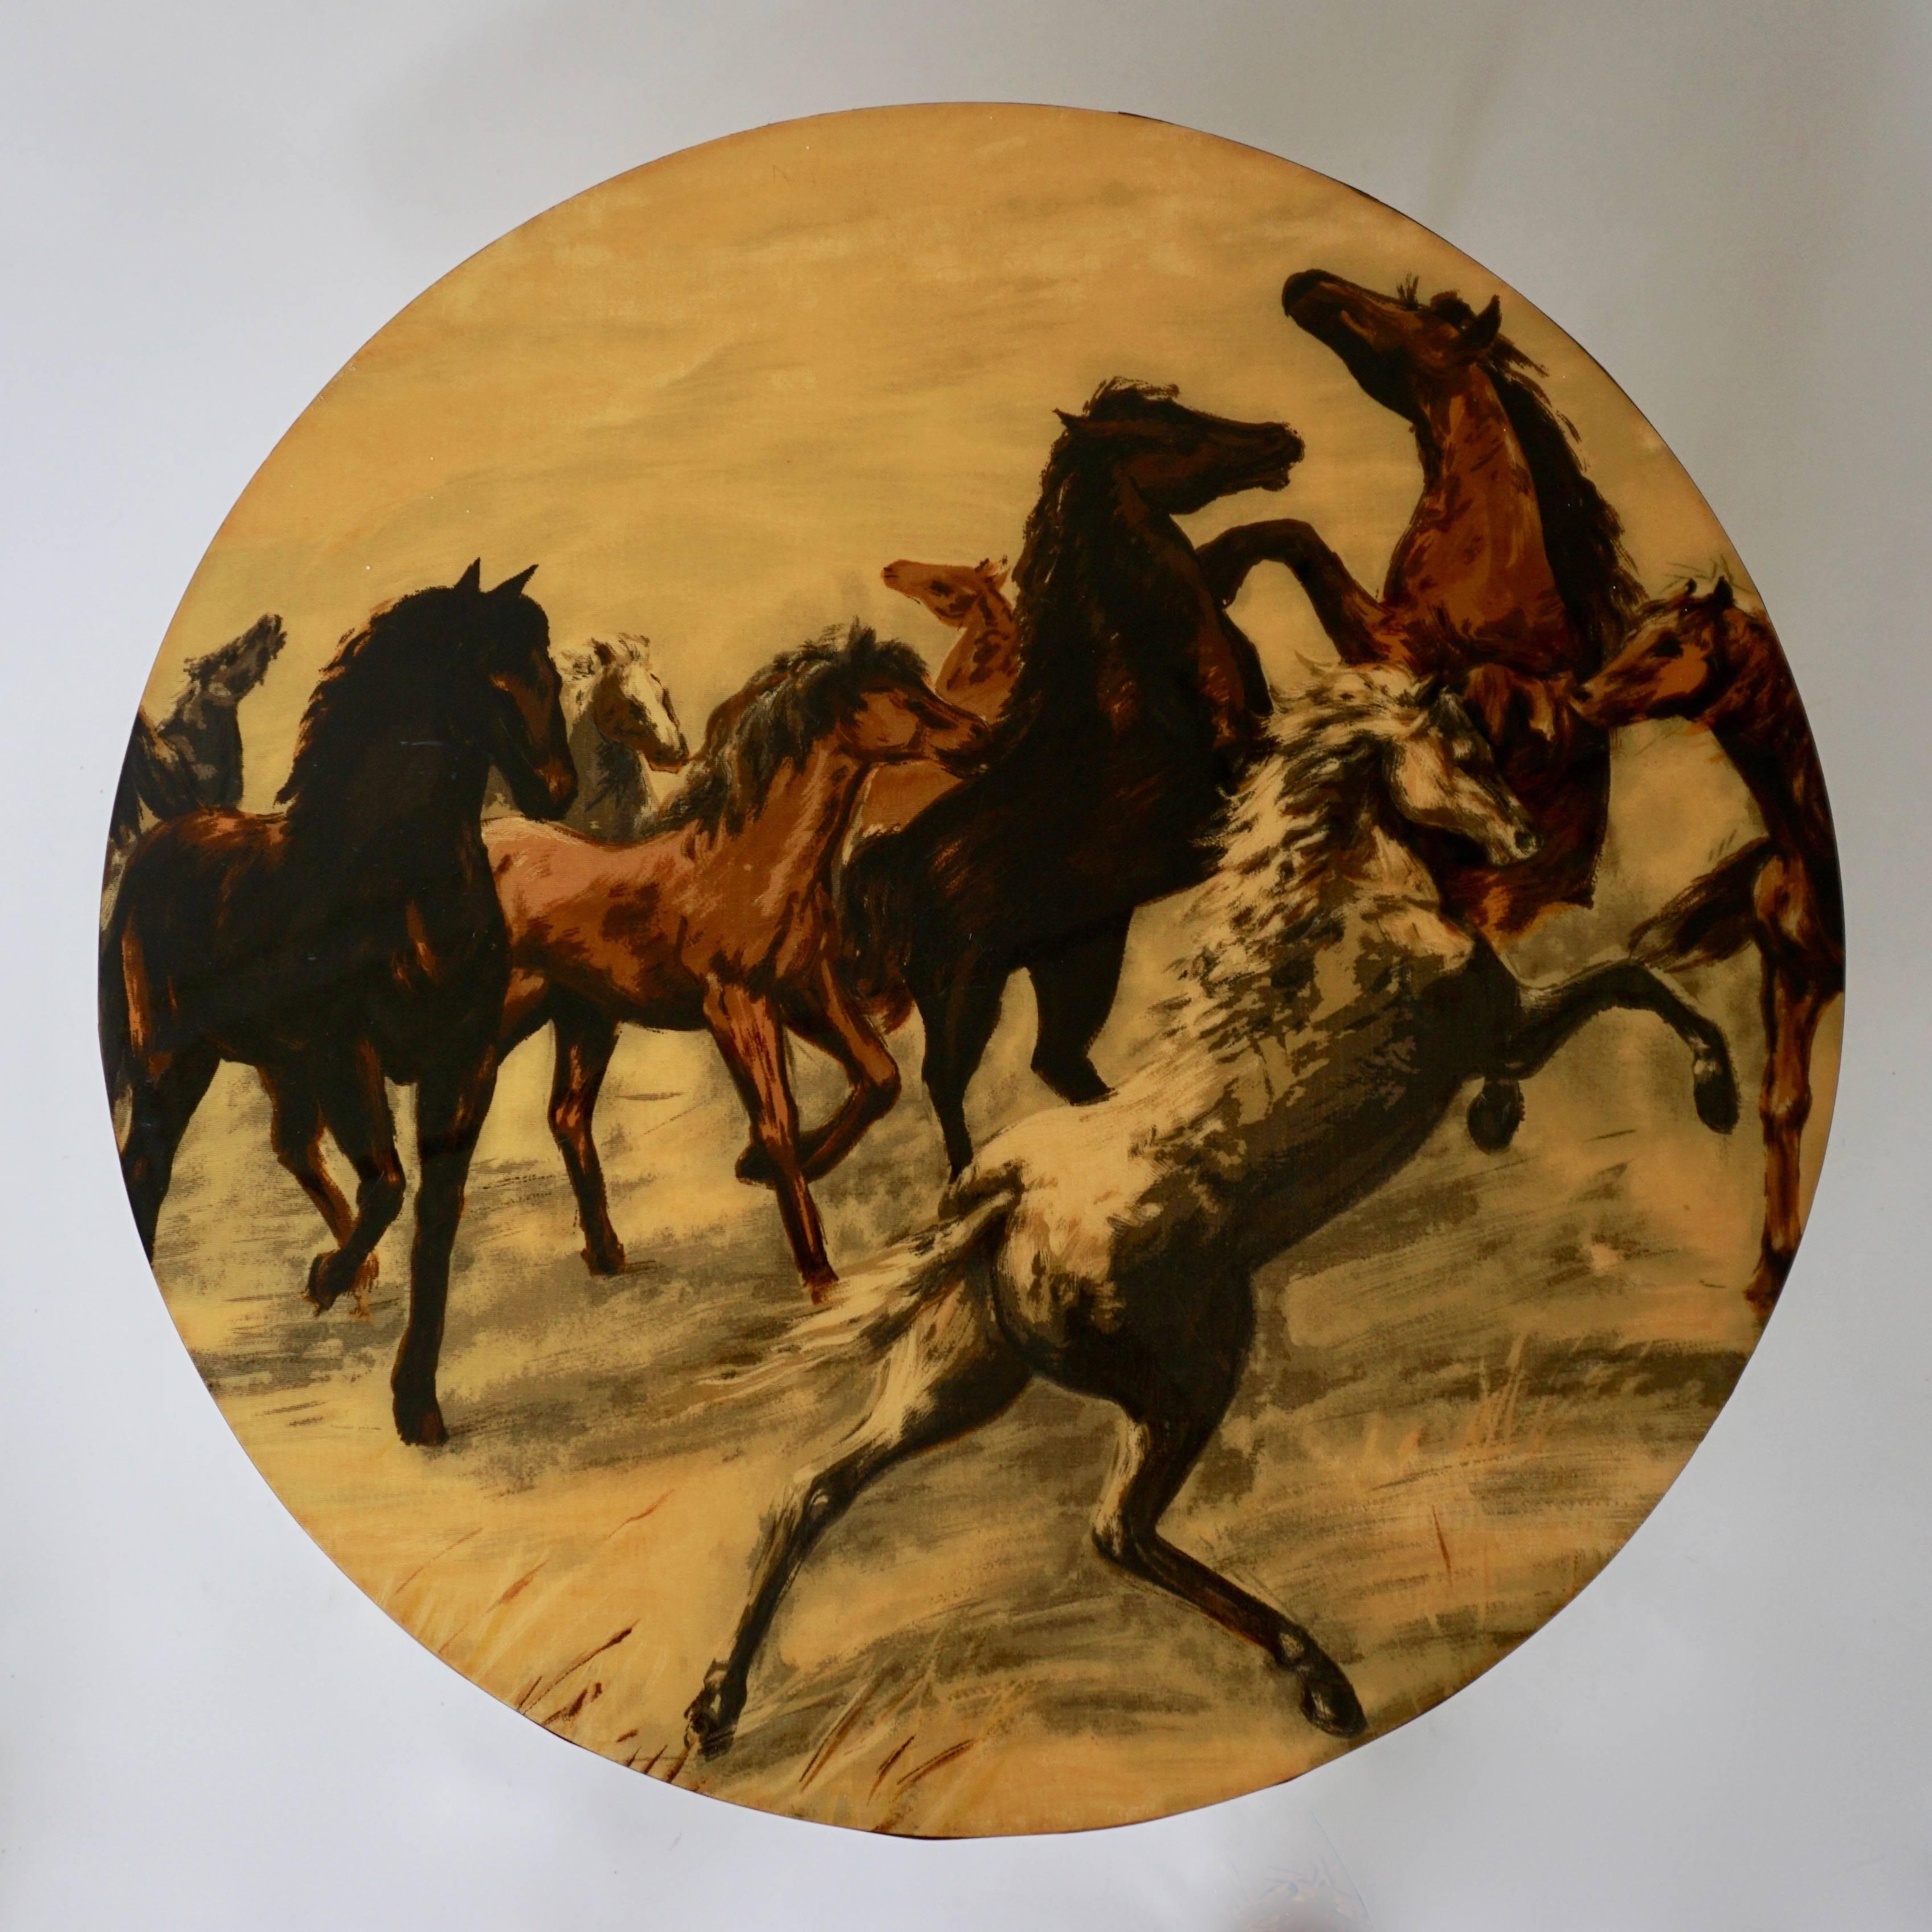 Coffee table with horses decorated on the top.
Measure: Diameter 77 cm.
Height 45 cm.